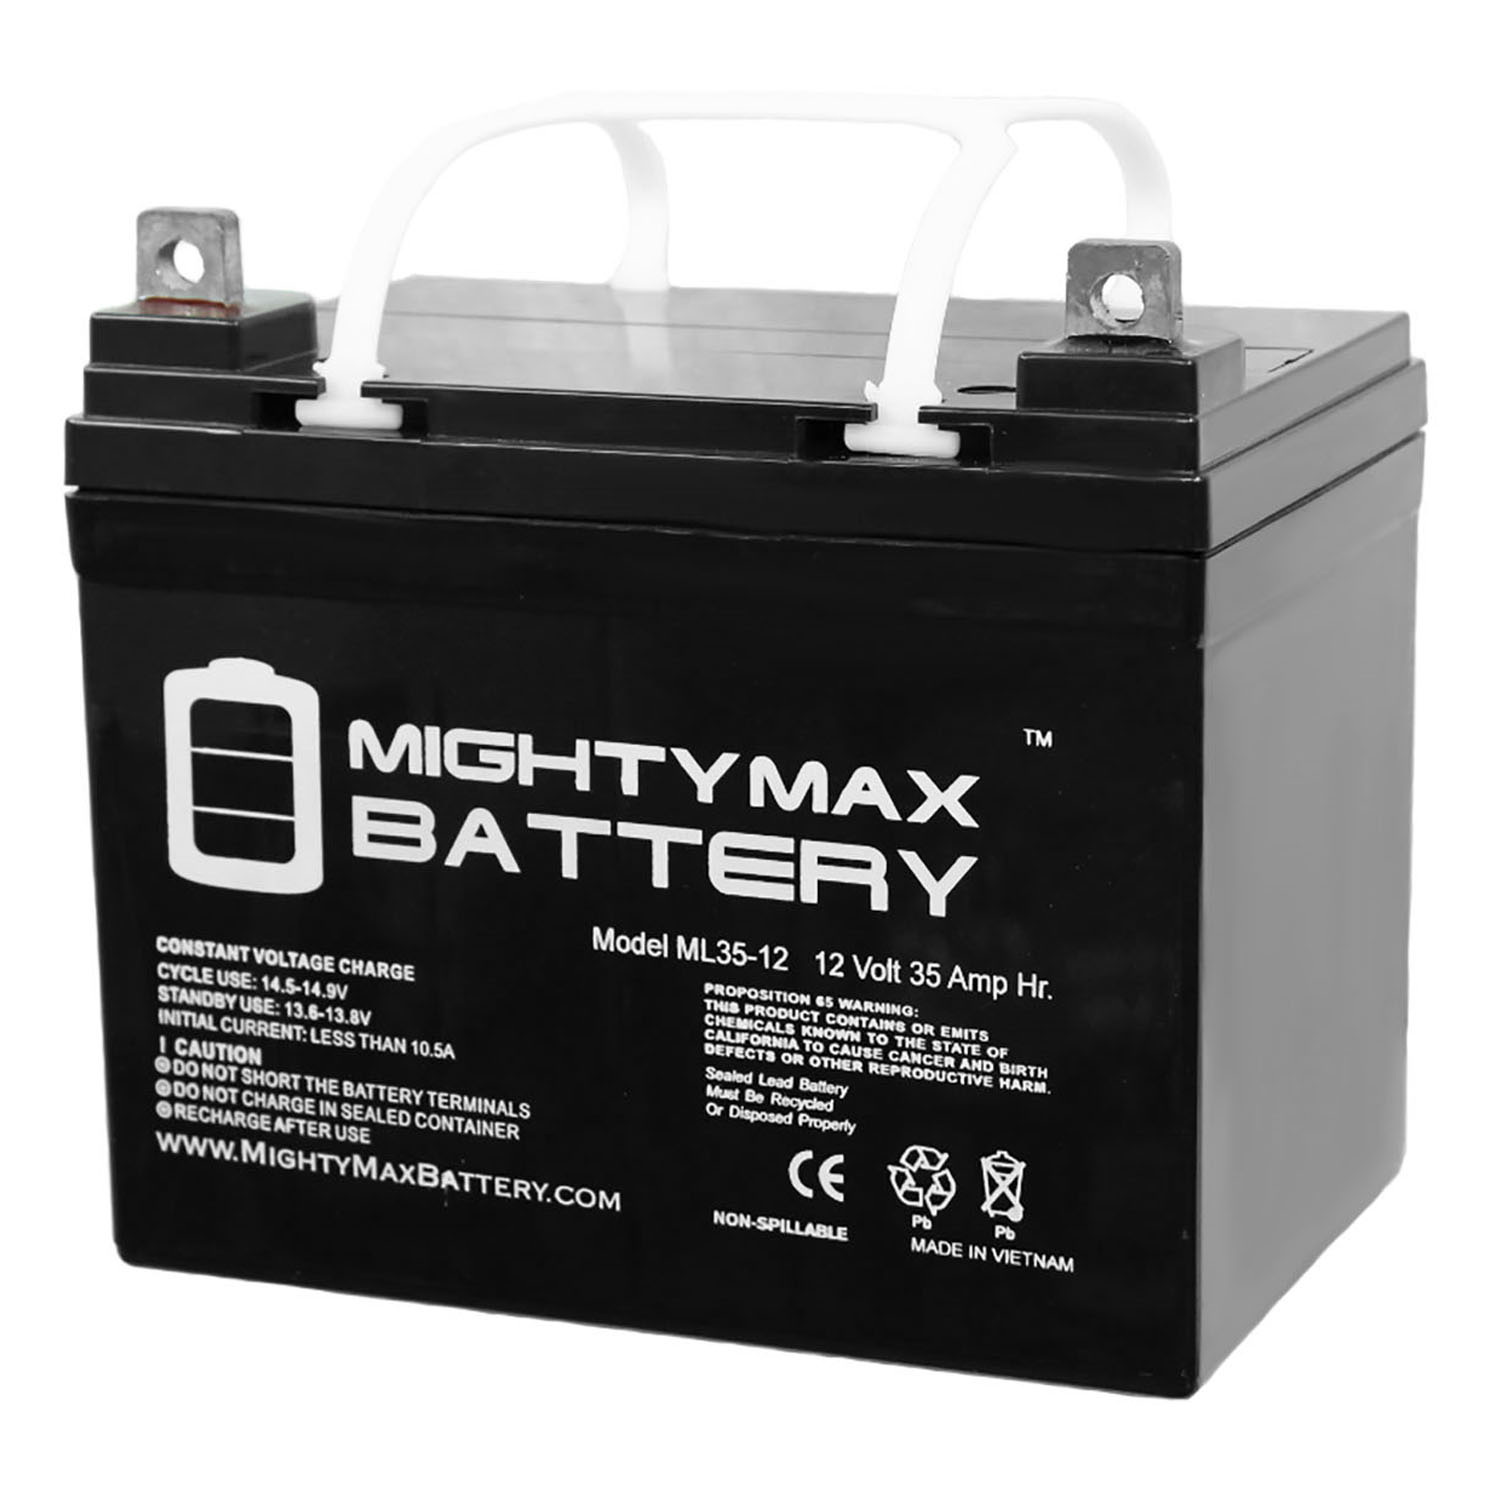 Mighty Max Battery Group U1 Battery Box for Marine, Scooter, Solar Deep Cycle | MAX3476897